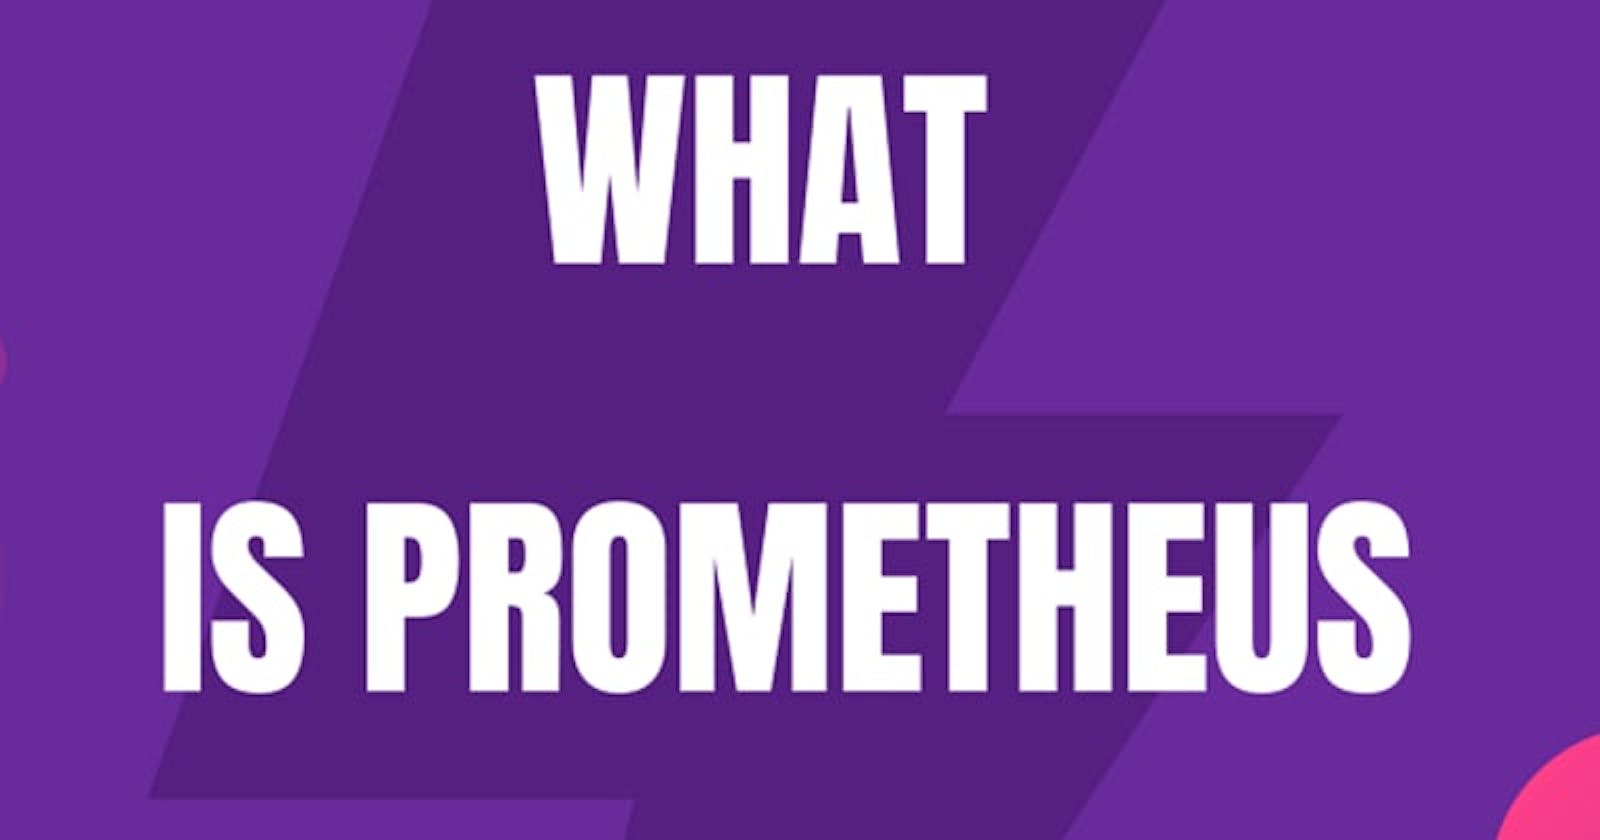 What is Prometheus monitoring?